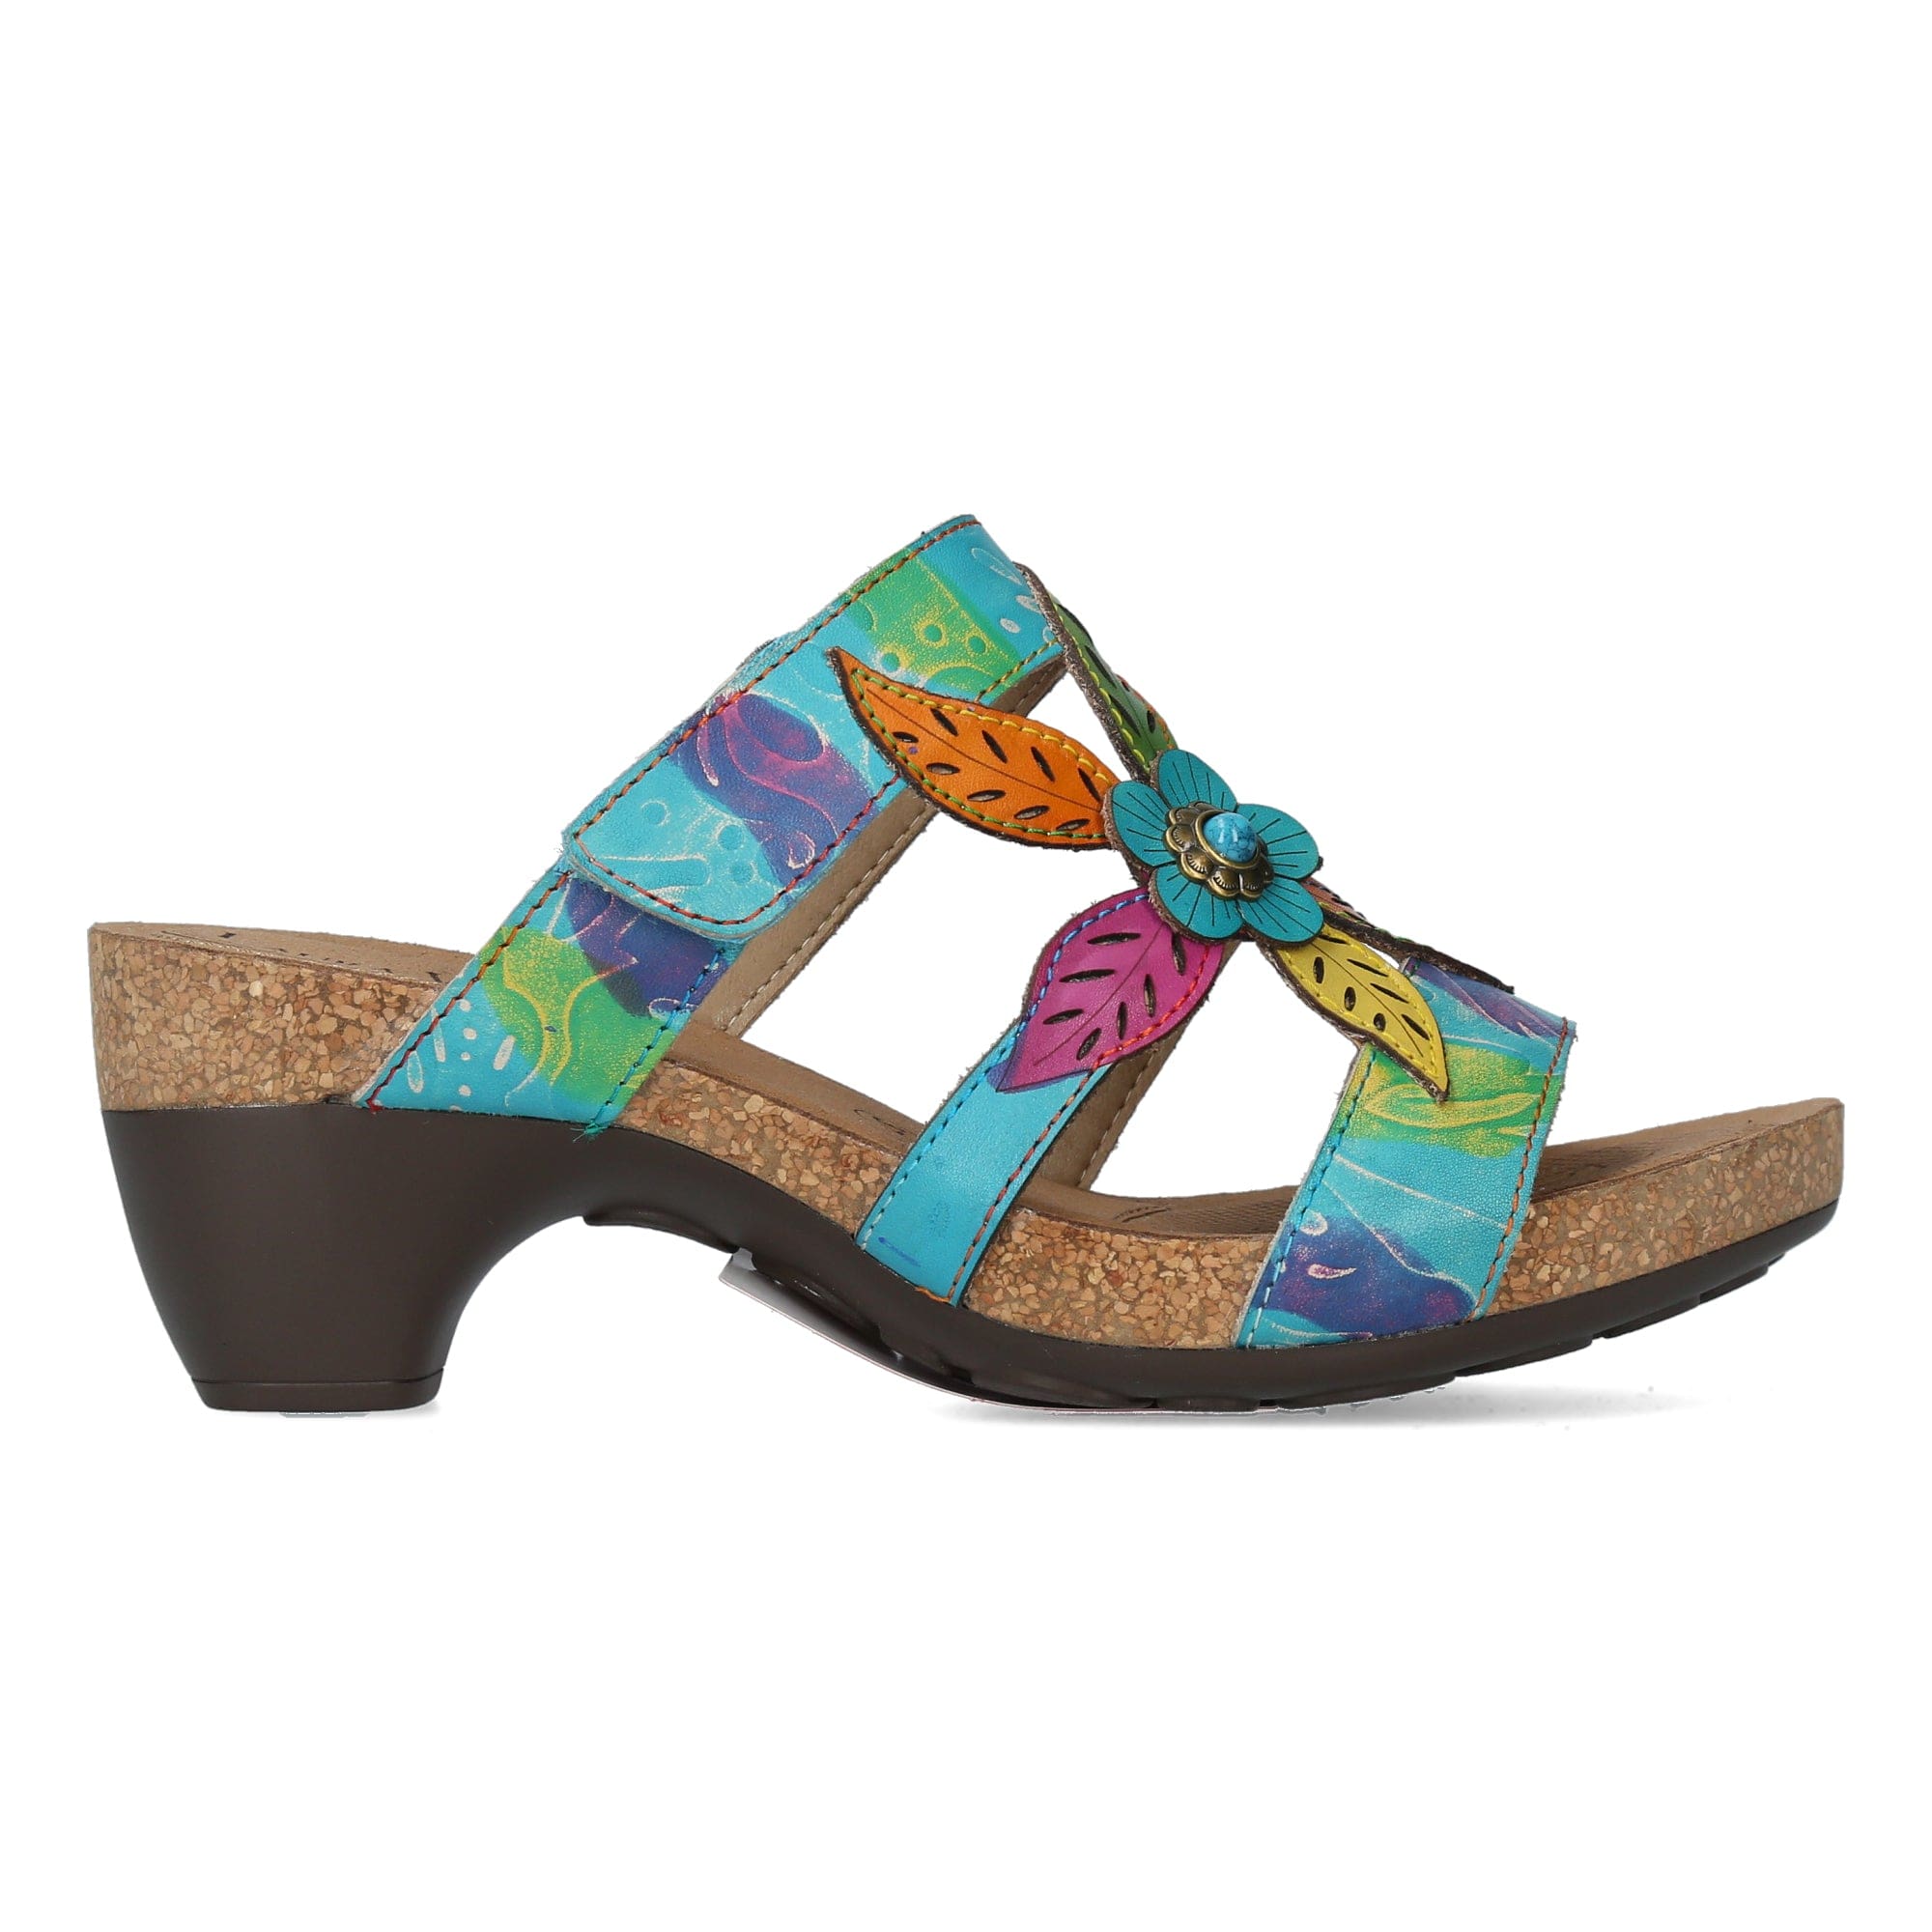 Chaussures LANO 03 - 35 / Turquoise - Sandale